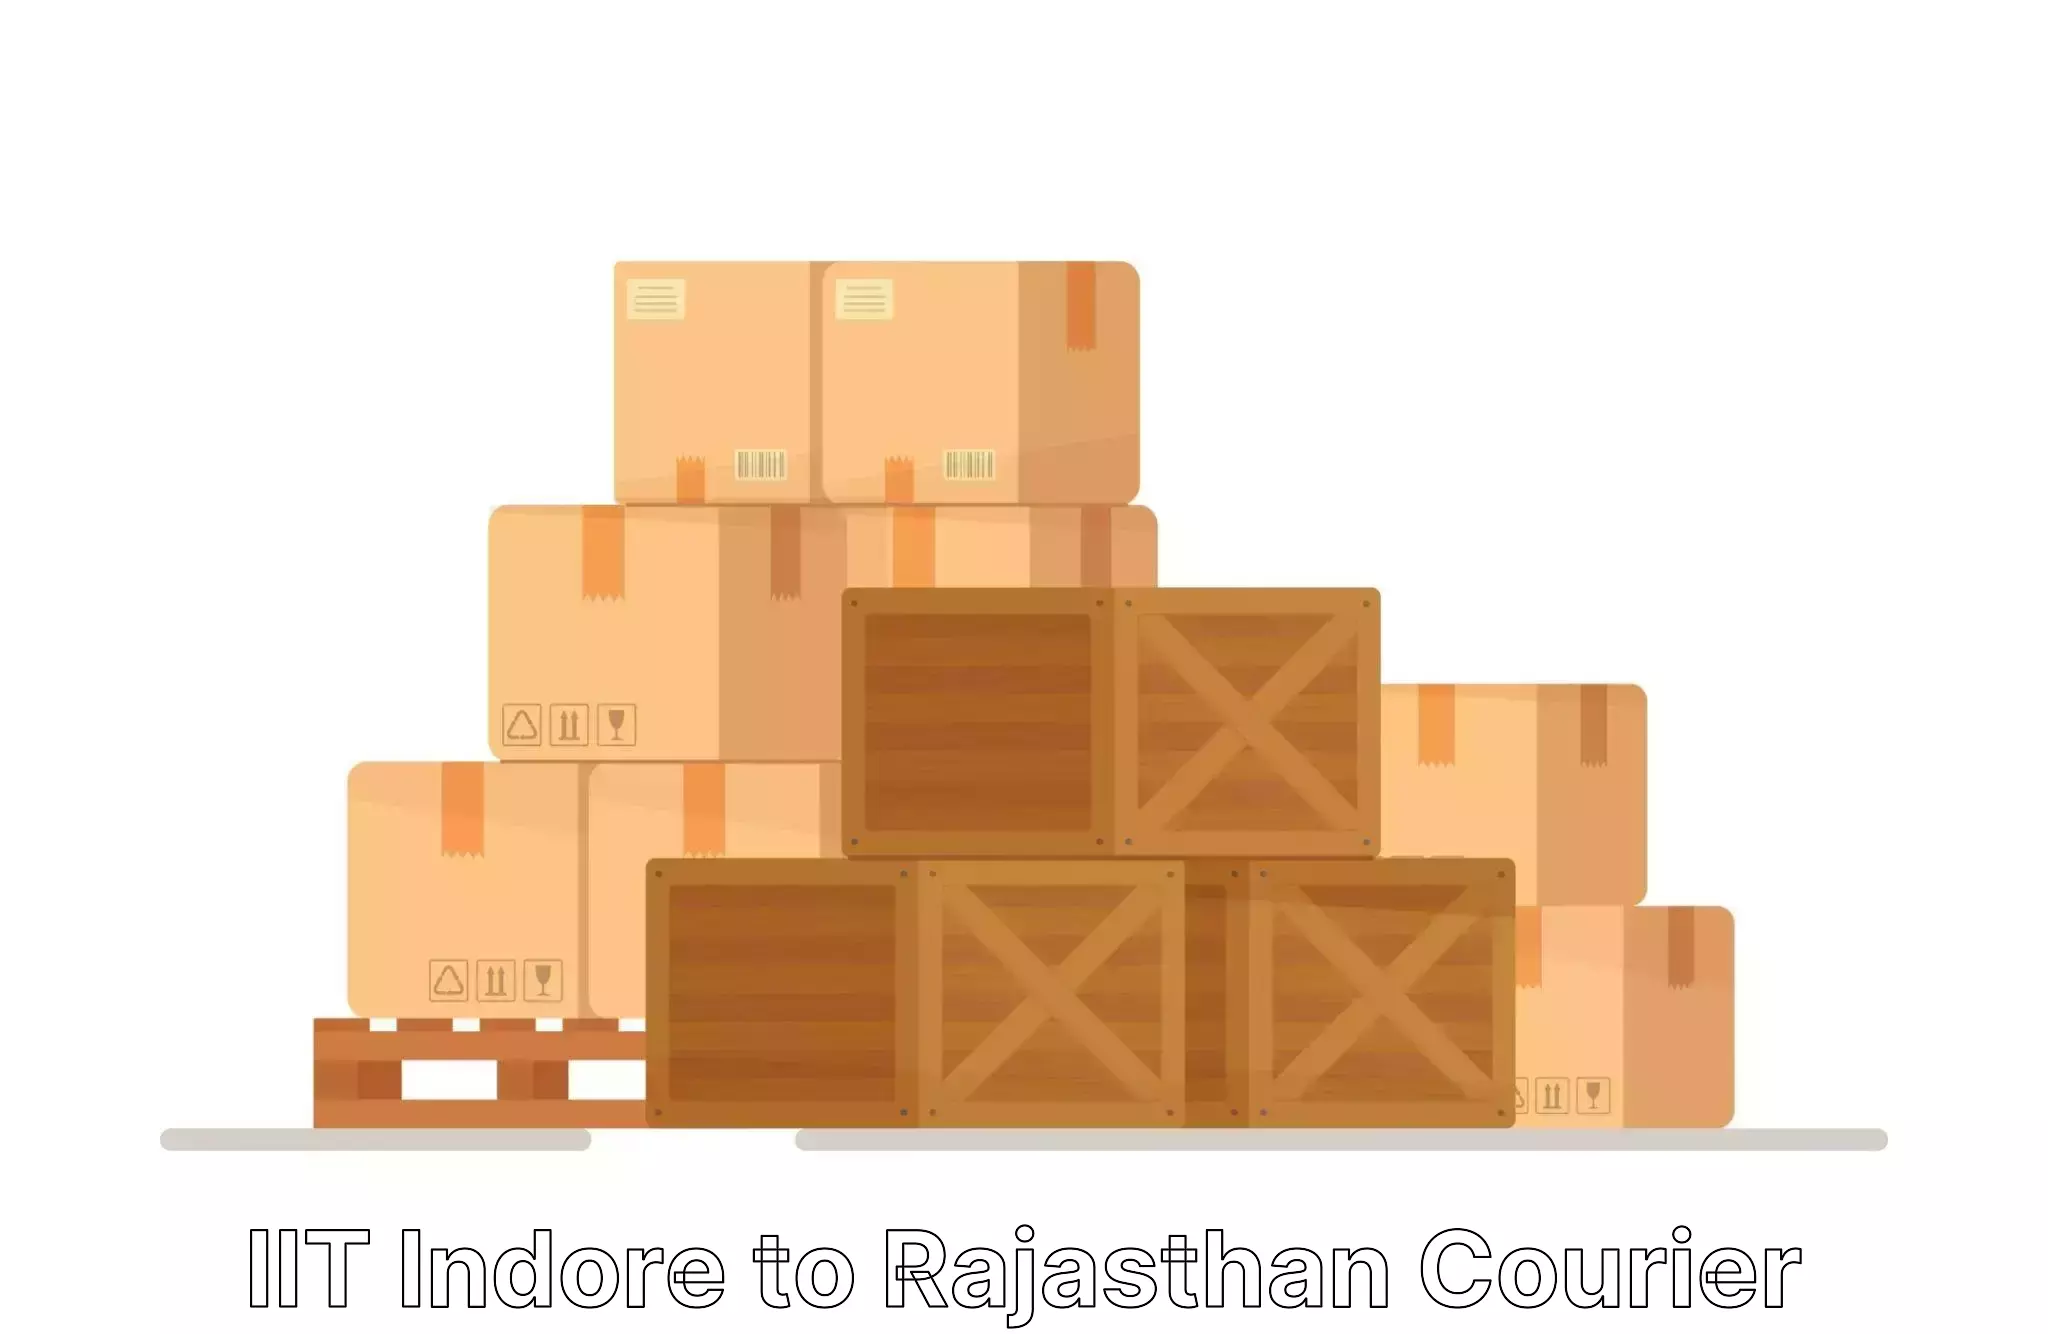 Affordable relocation services in IIT Indore to Mathania